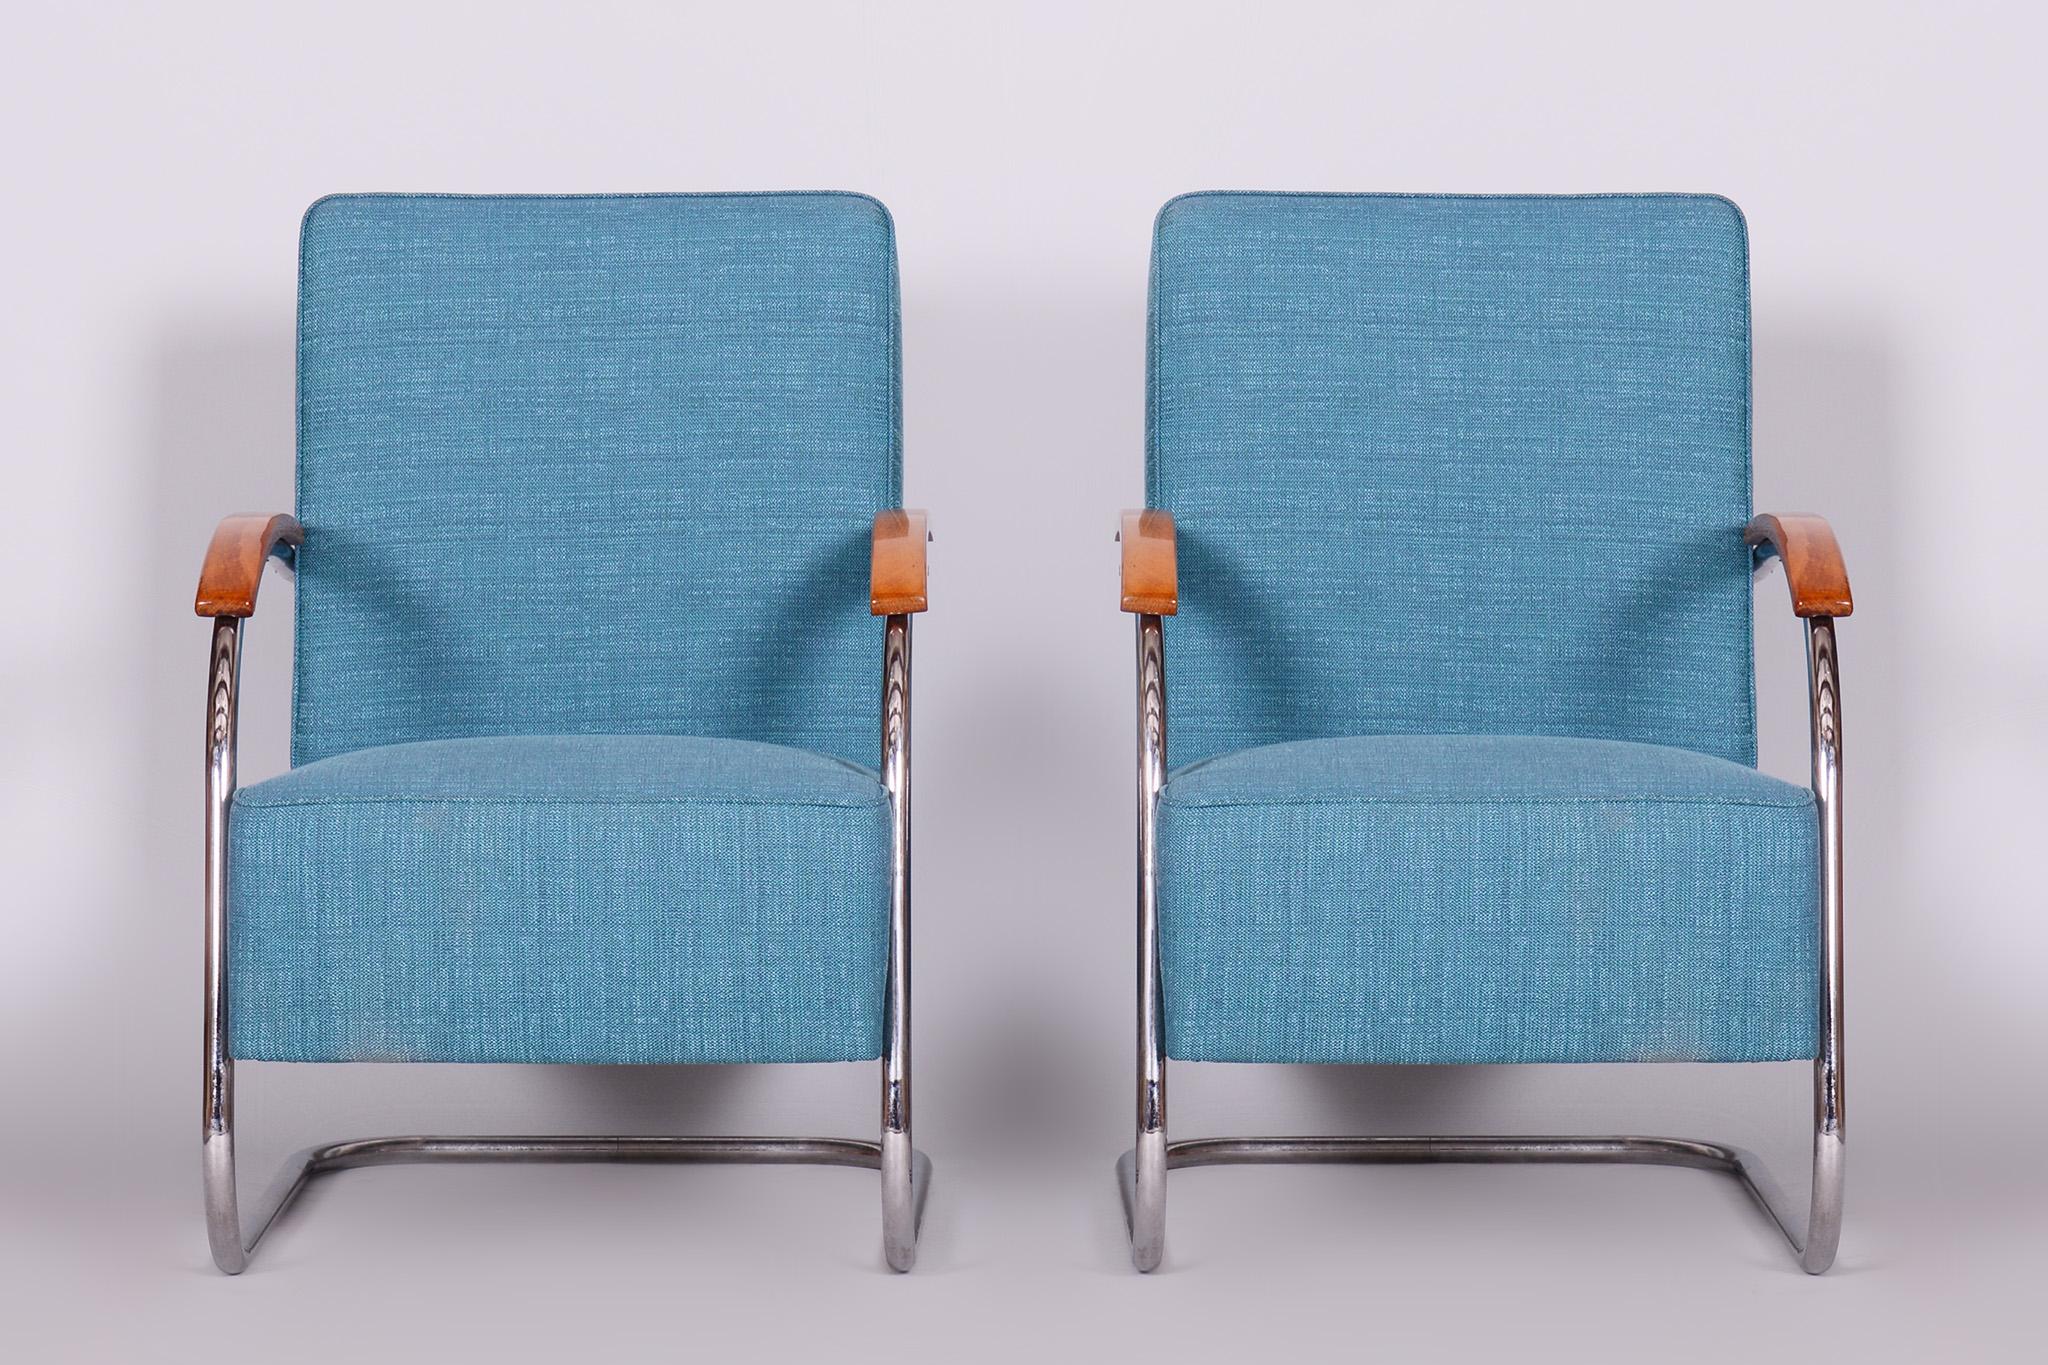 Set of Two Restored Blue Armchairs by Mucke-Melder, Czechia, 1930s For Sale 3